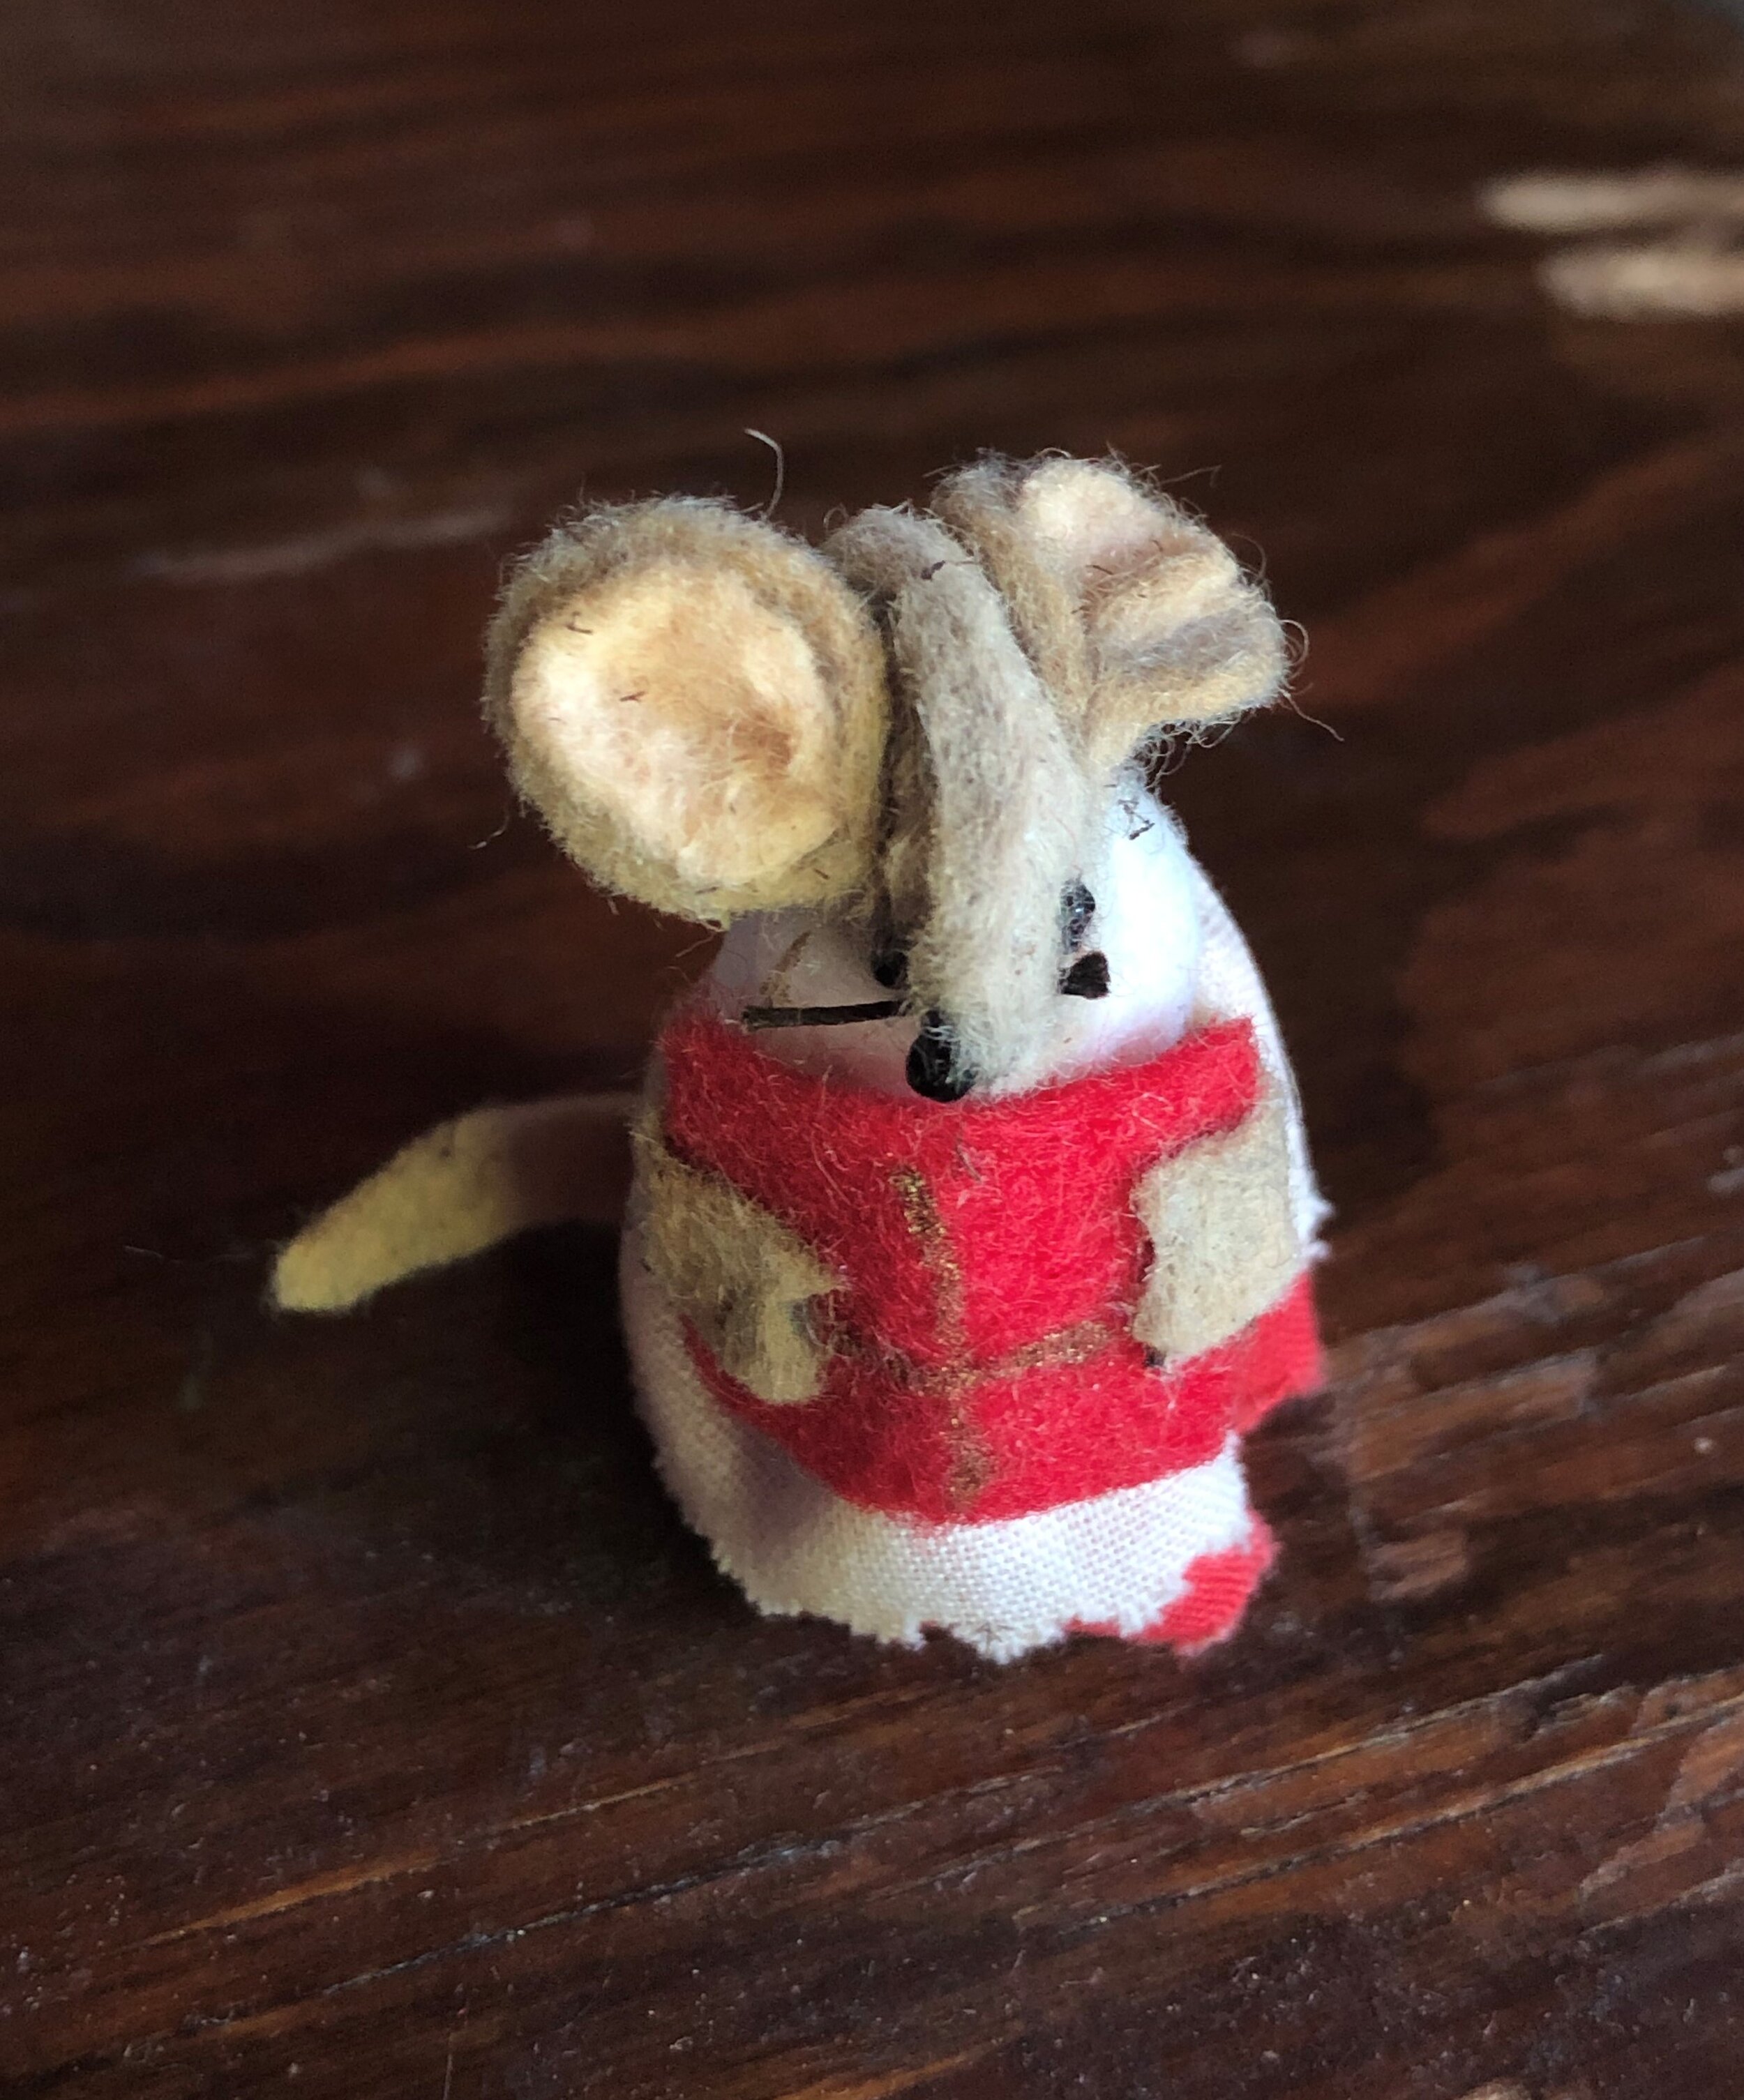 Small felt mouse holding a red book with a gold cross